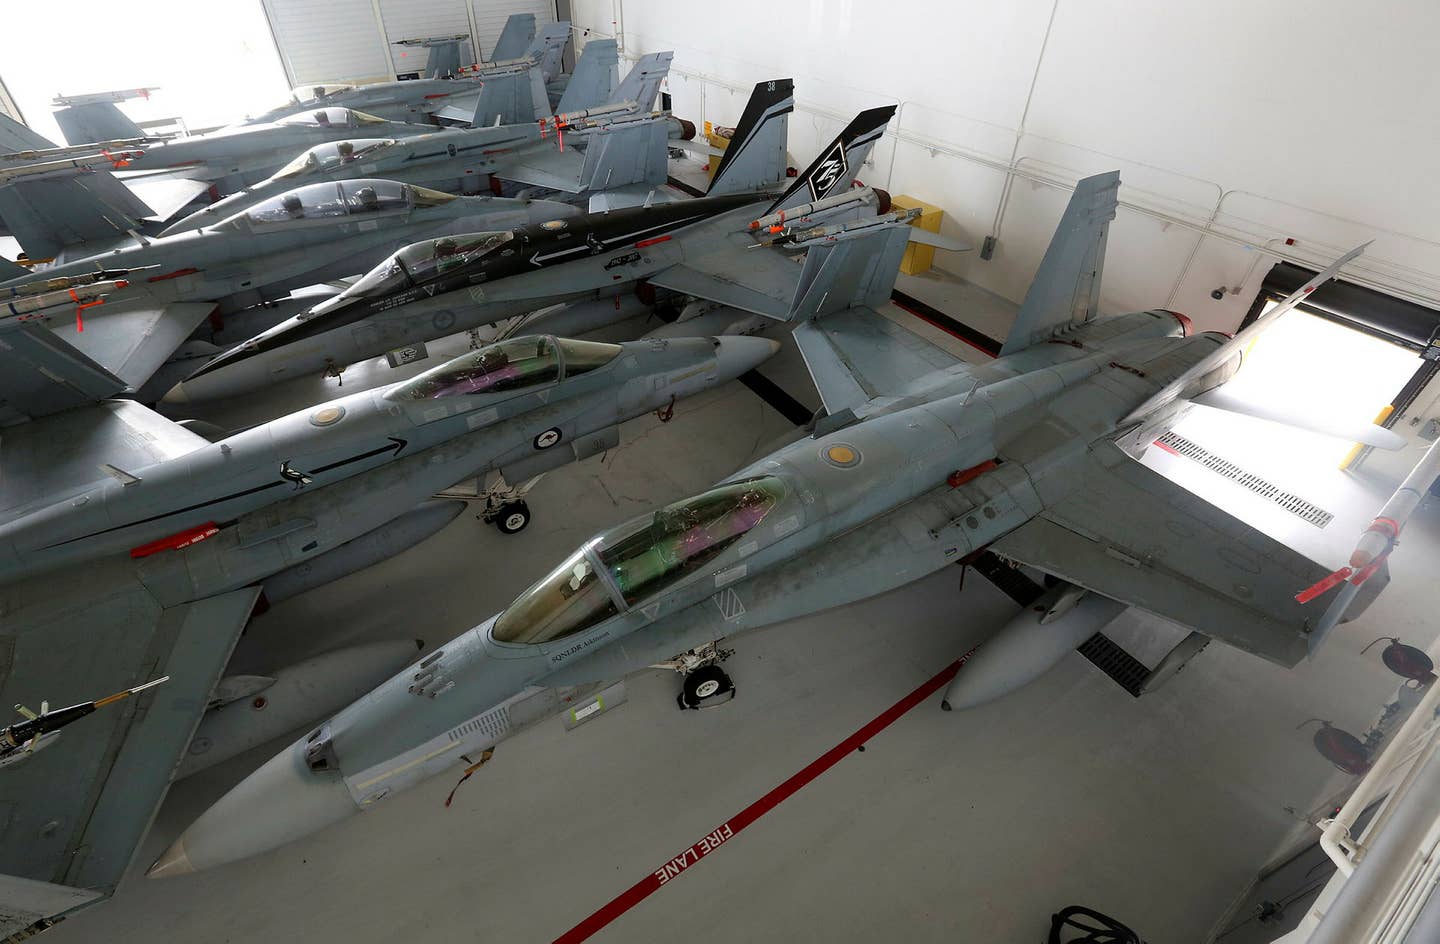 RAAF F/A-18s packed into a hangar at Andersen AFB in Guam. (RAAF)